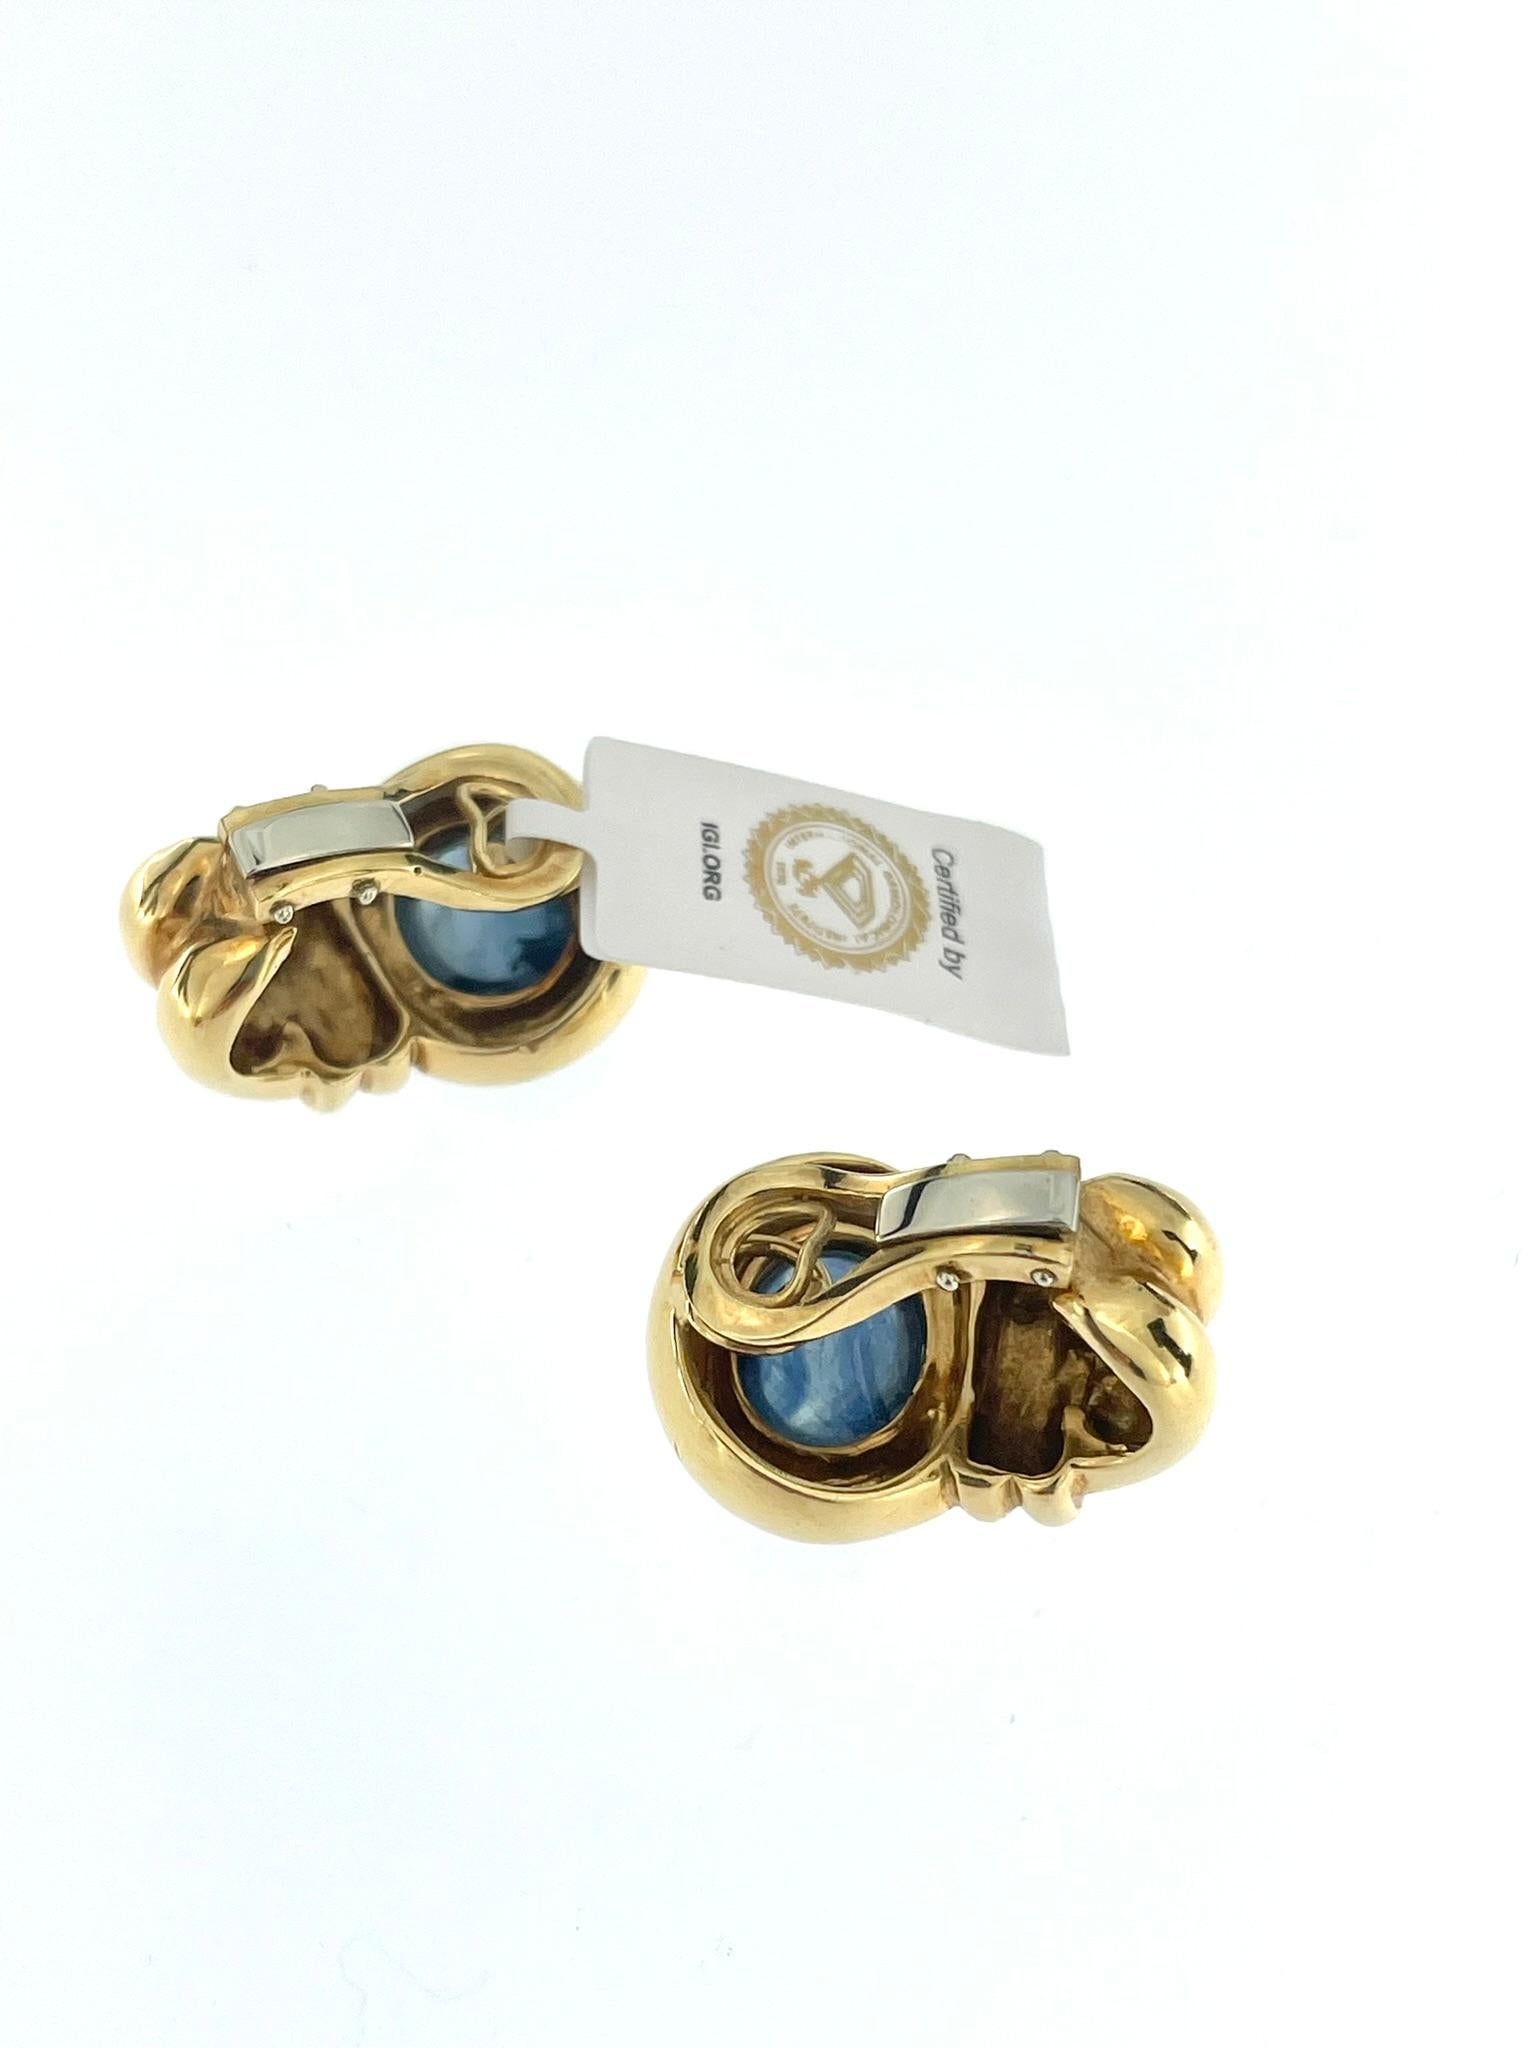 IGI Certified Ceylon Sapphires Yellow Gold Set Earrings and Pendant In Good Condition For Sale In Esch-Sur-Alzette, LU